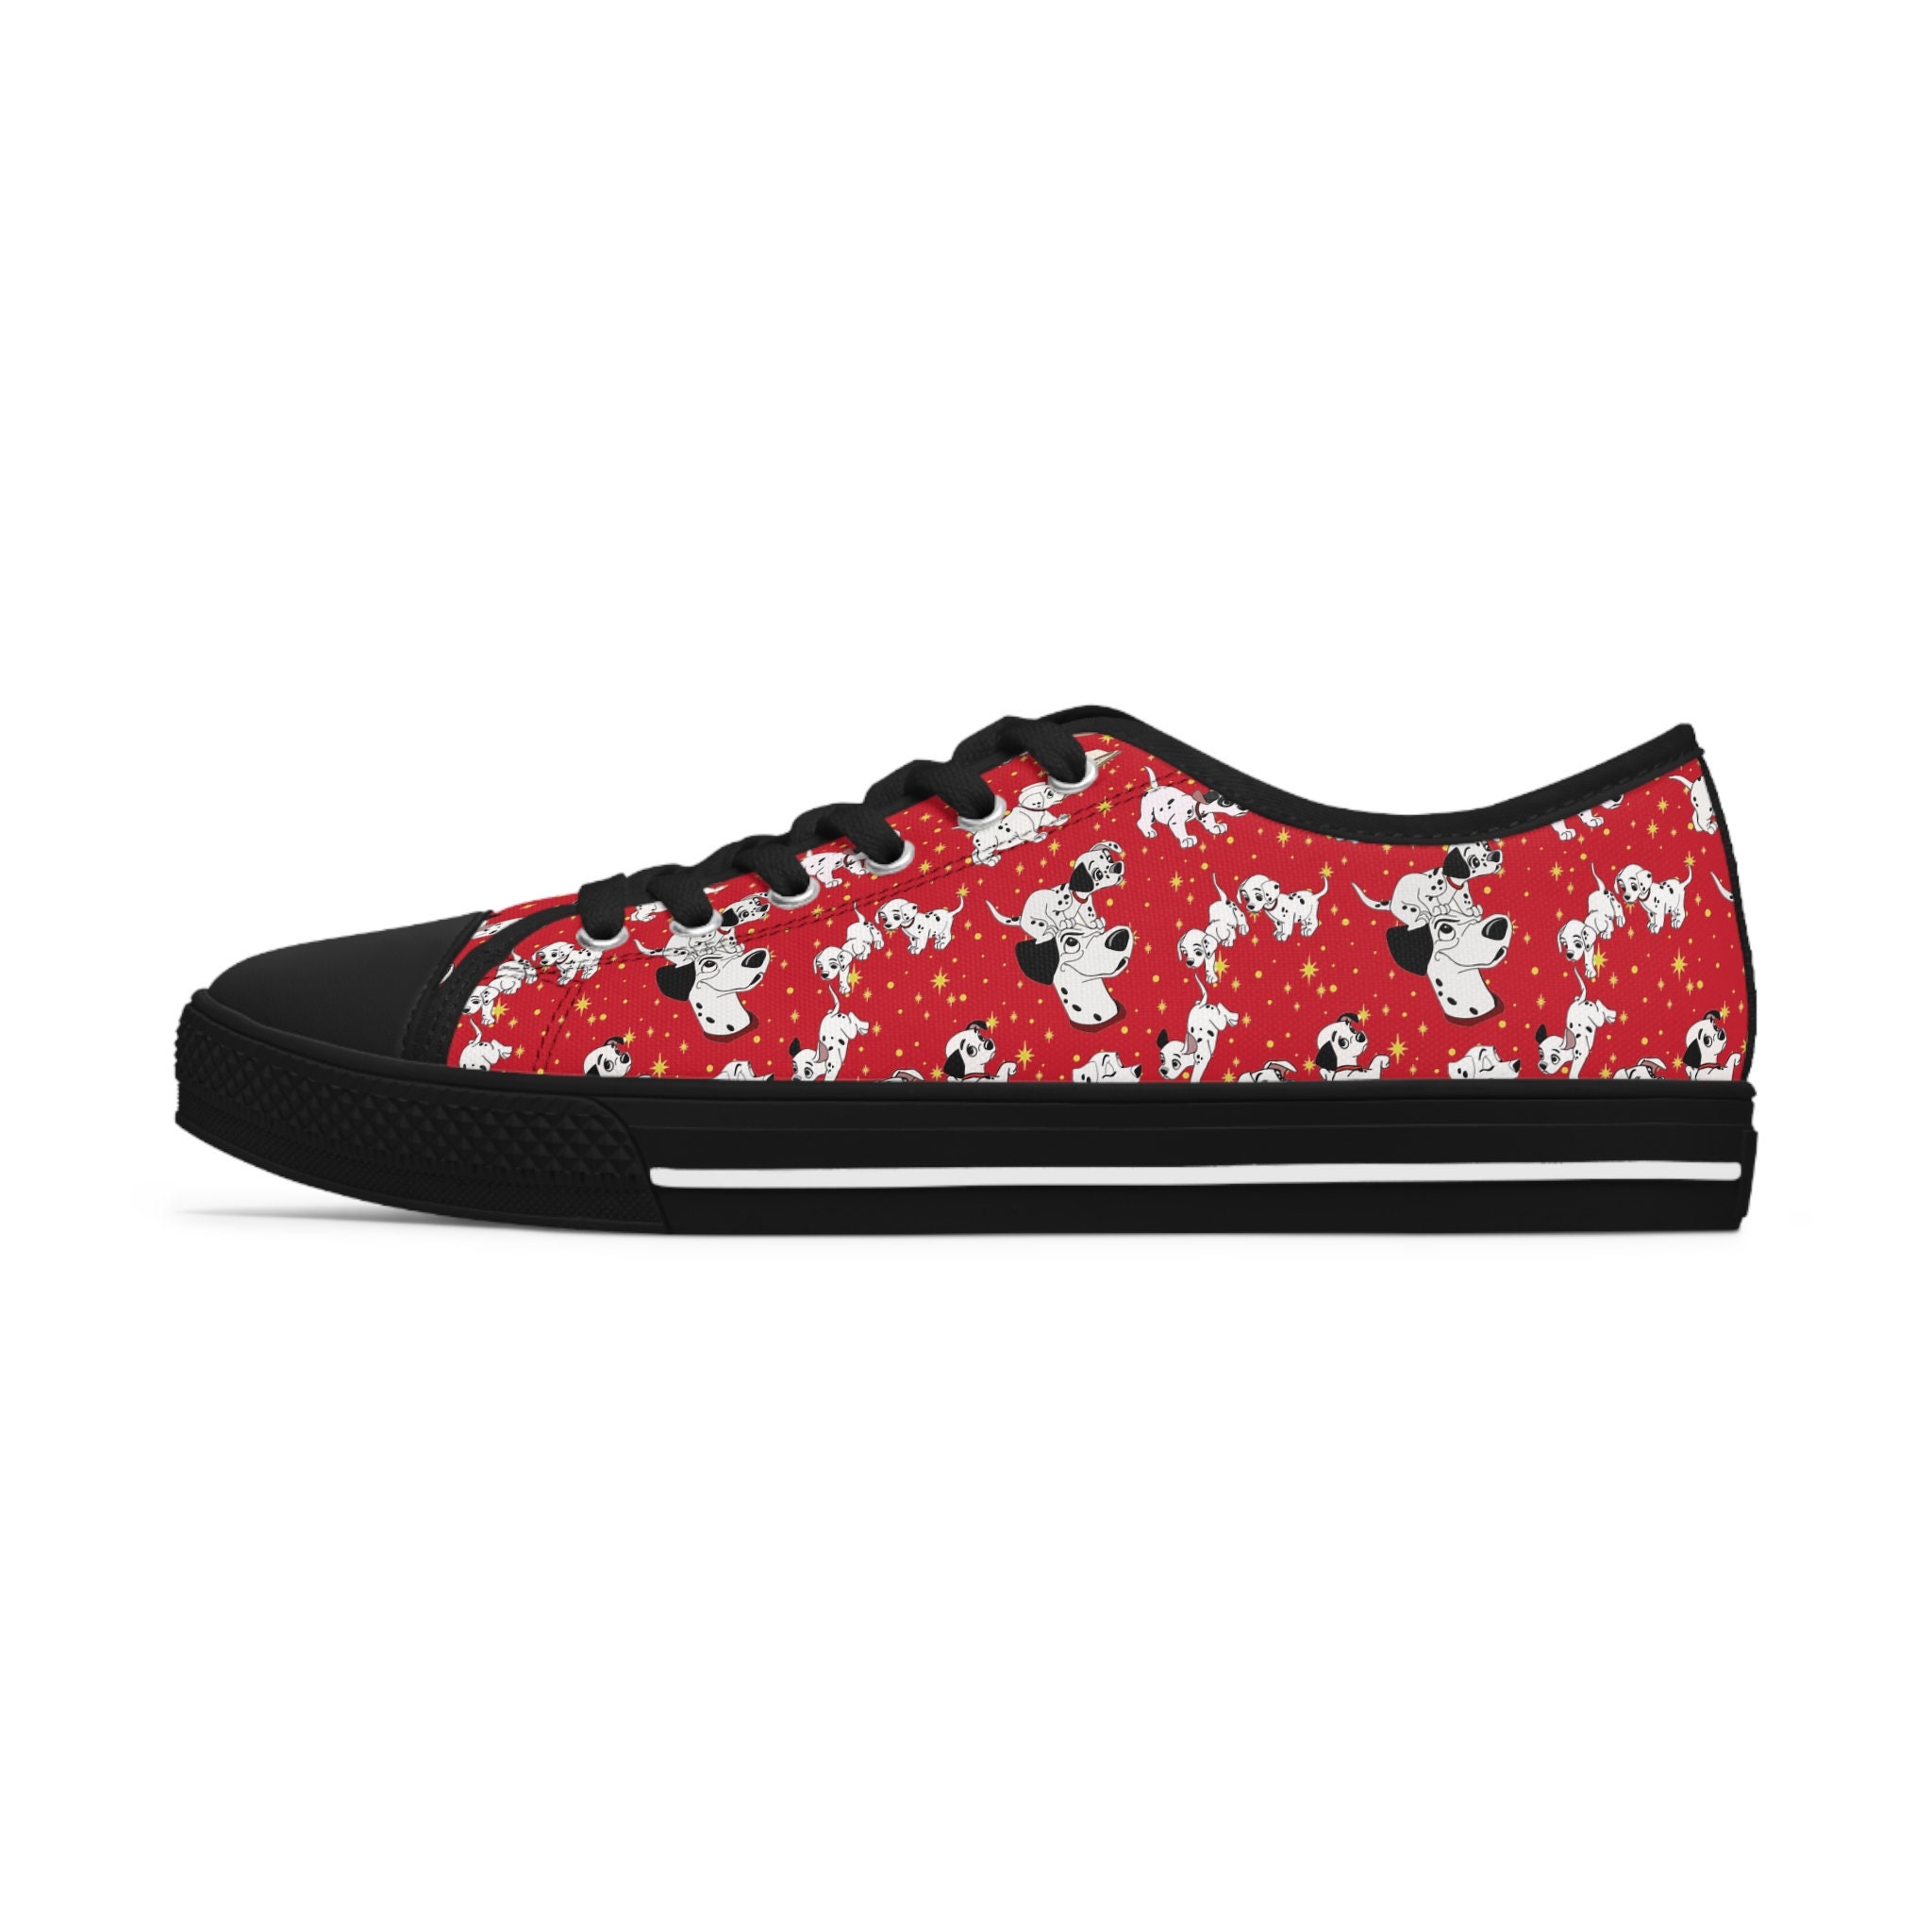 Discover Disney 101 Dalmations Customized Women's Low Top Sneakers